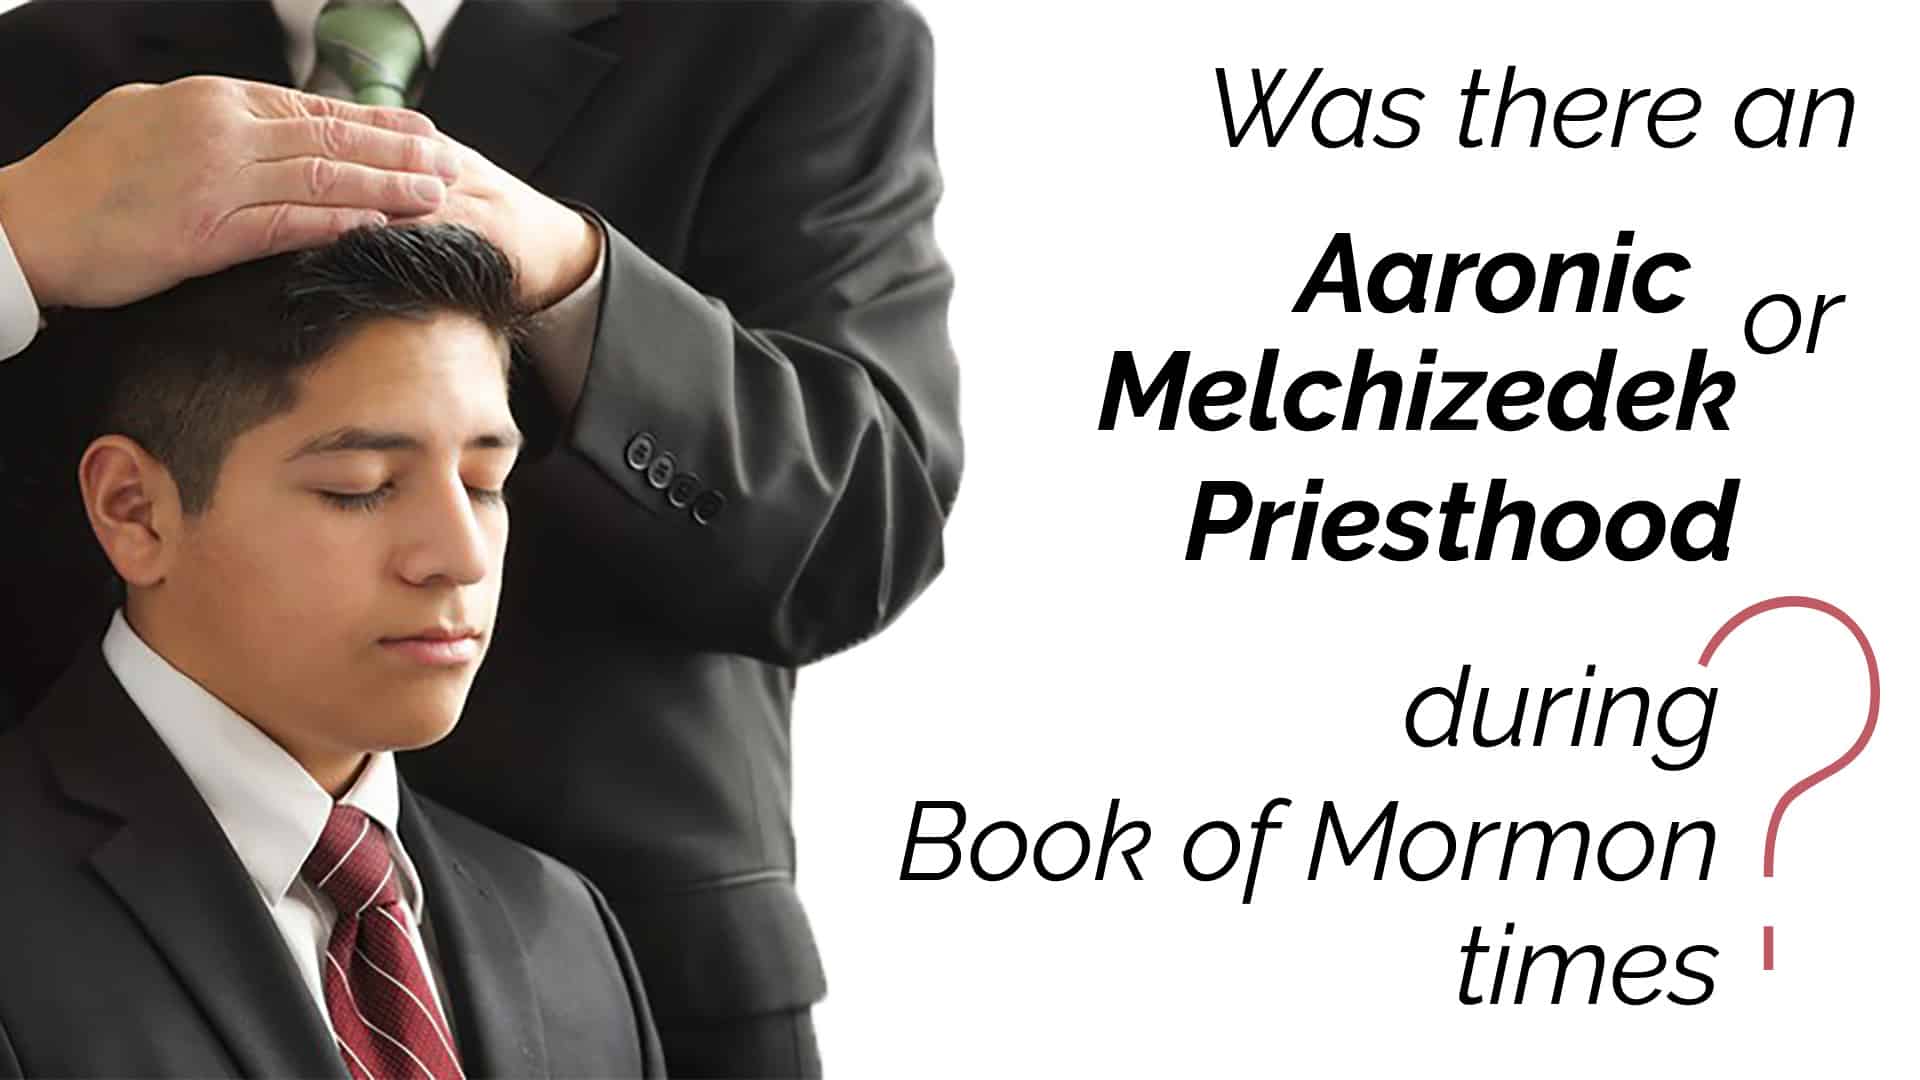 Was there an Aaronic or Melchizedek Priesthood during Book of Mormon times